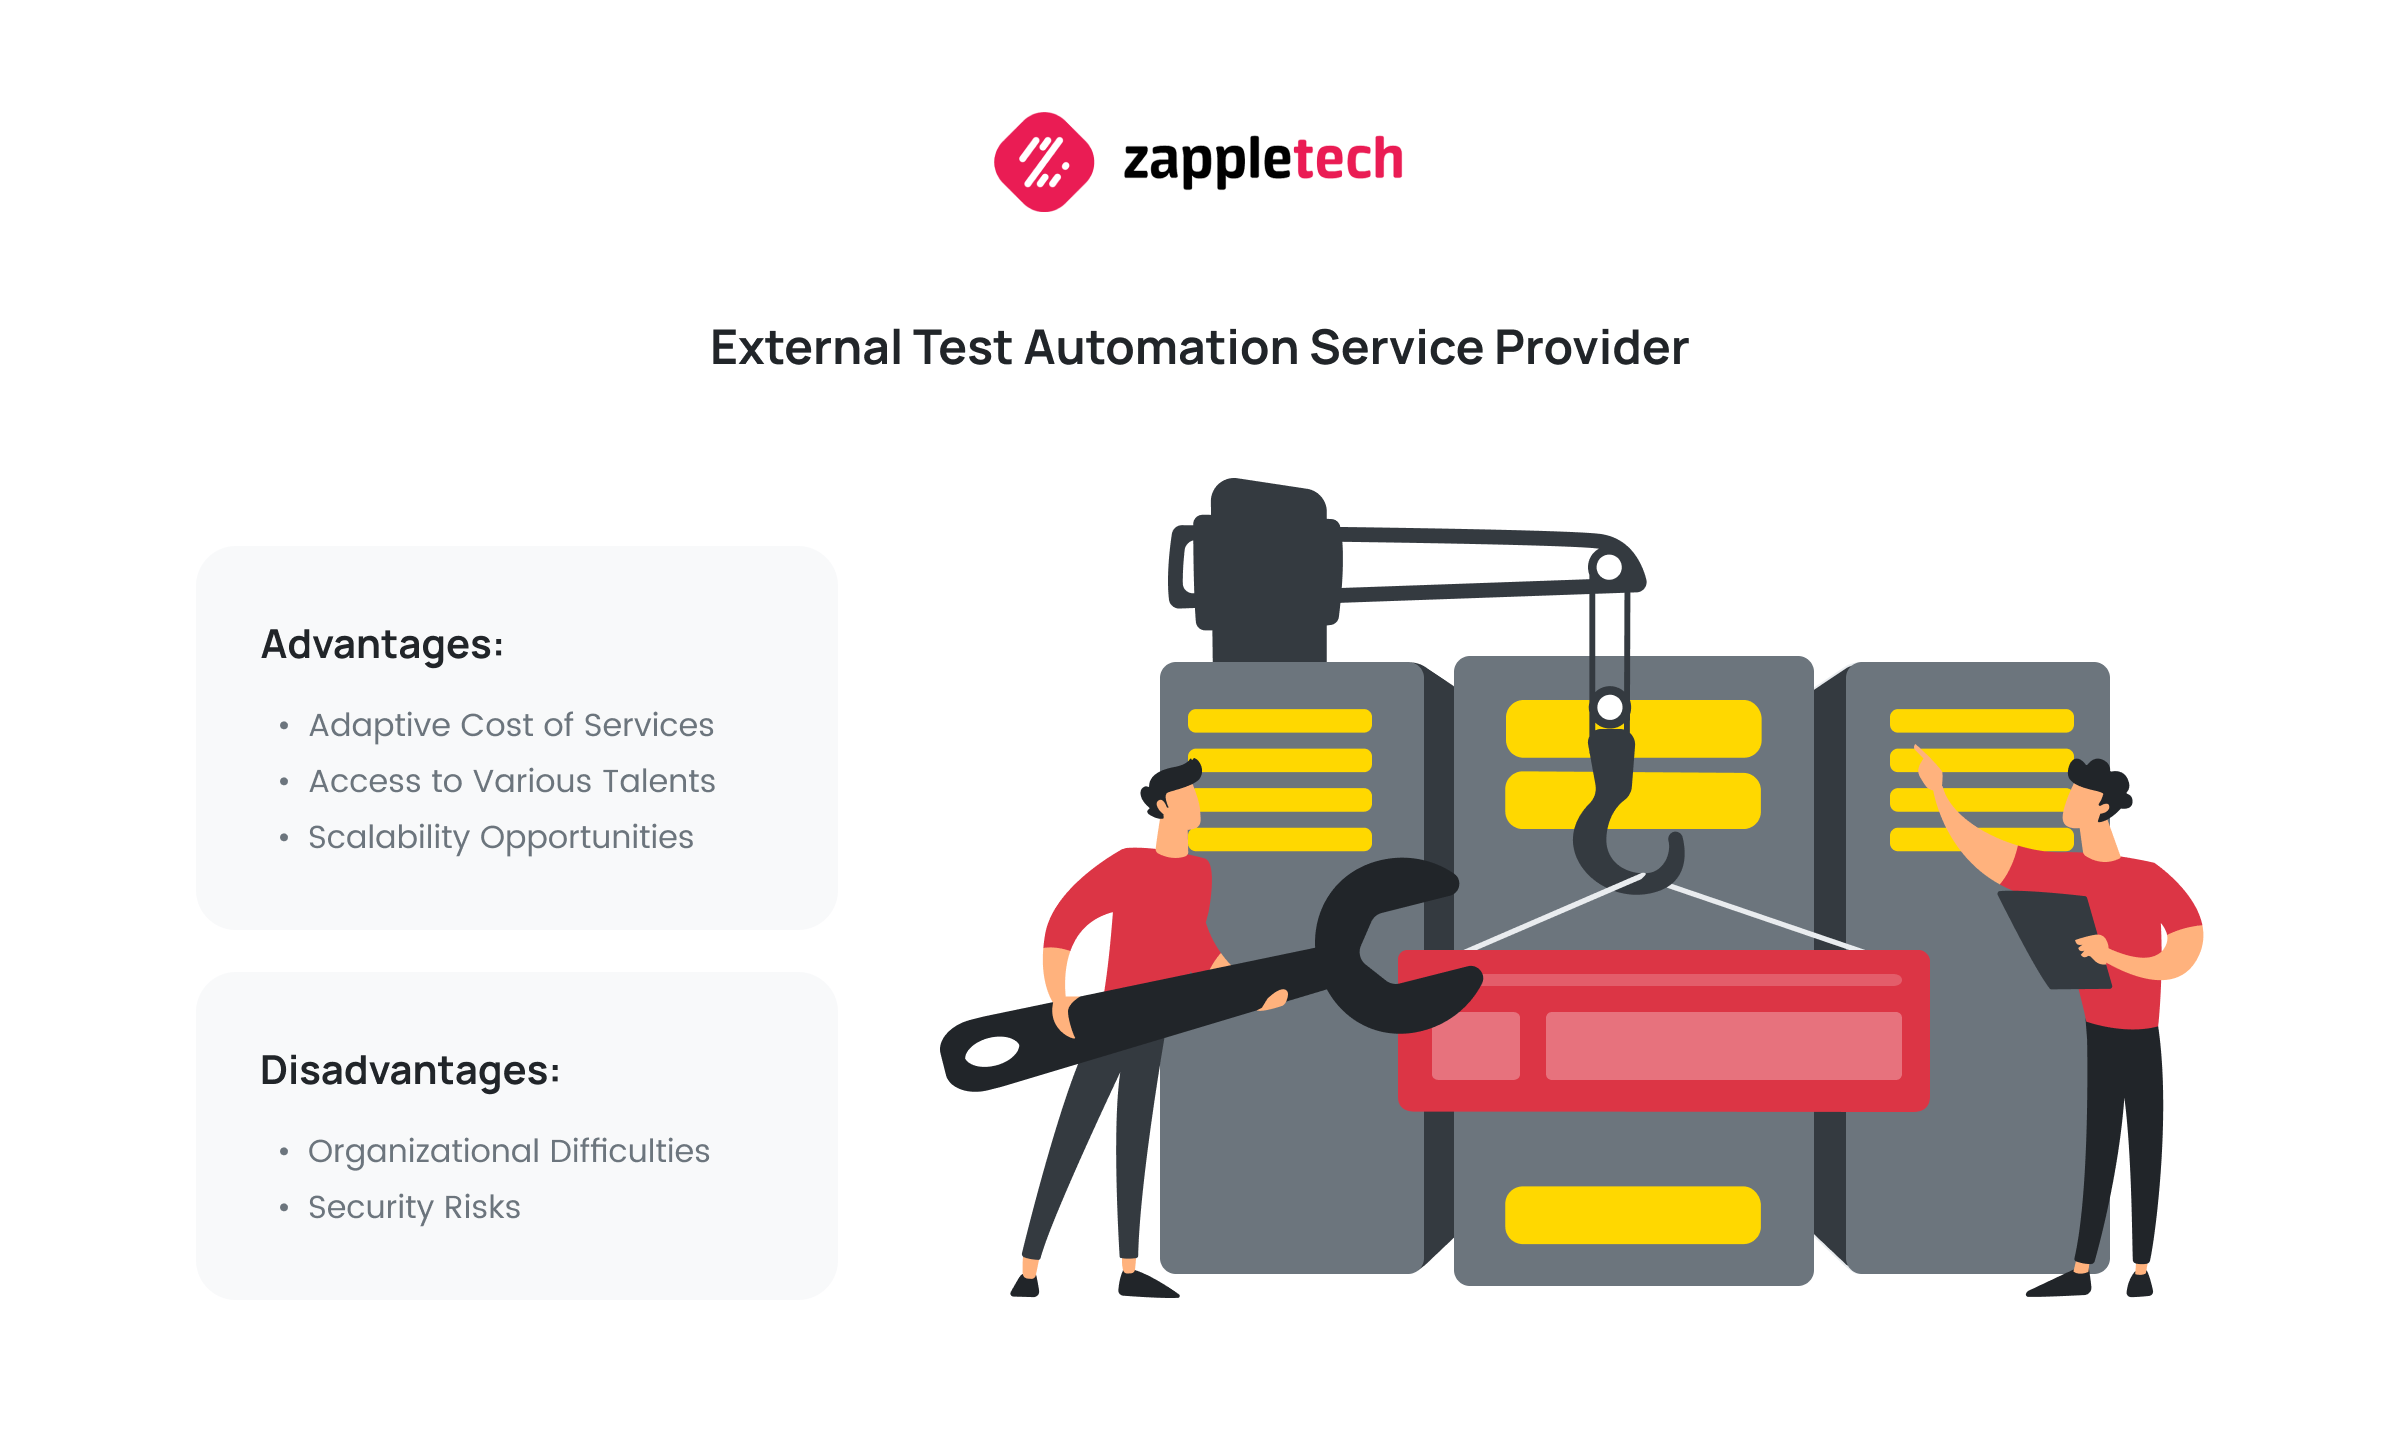 Advantages and Disadvantages of an External Test Automation Service Provider